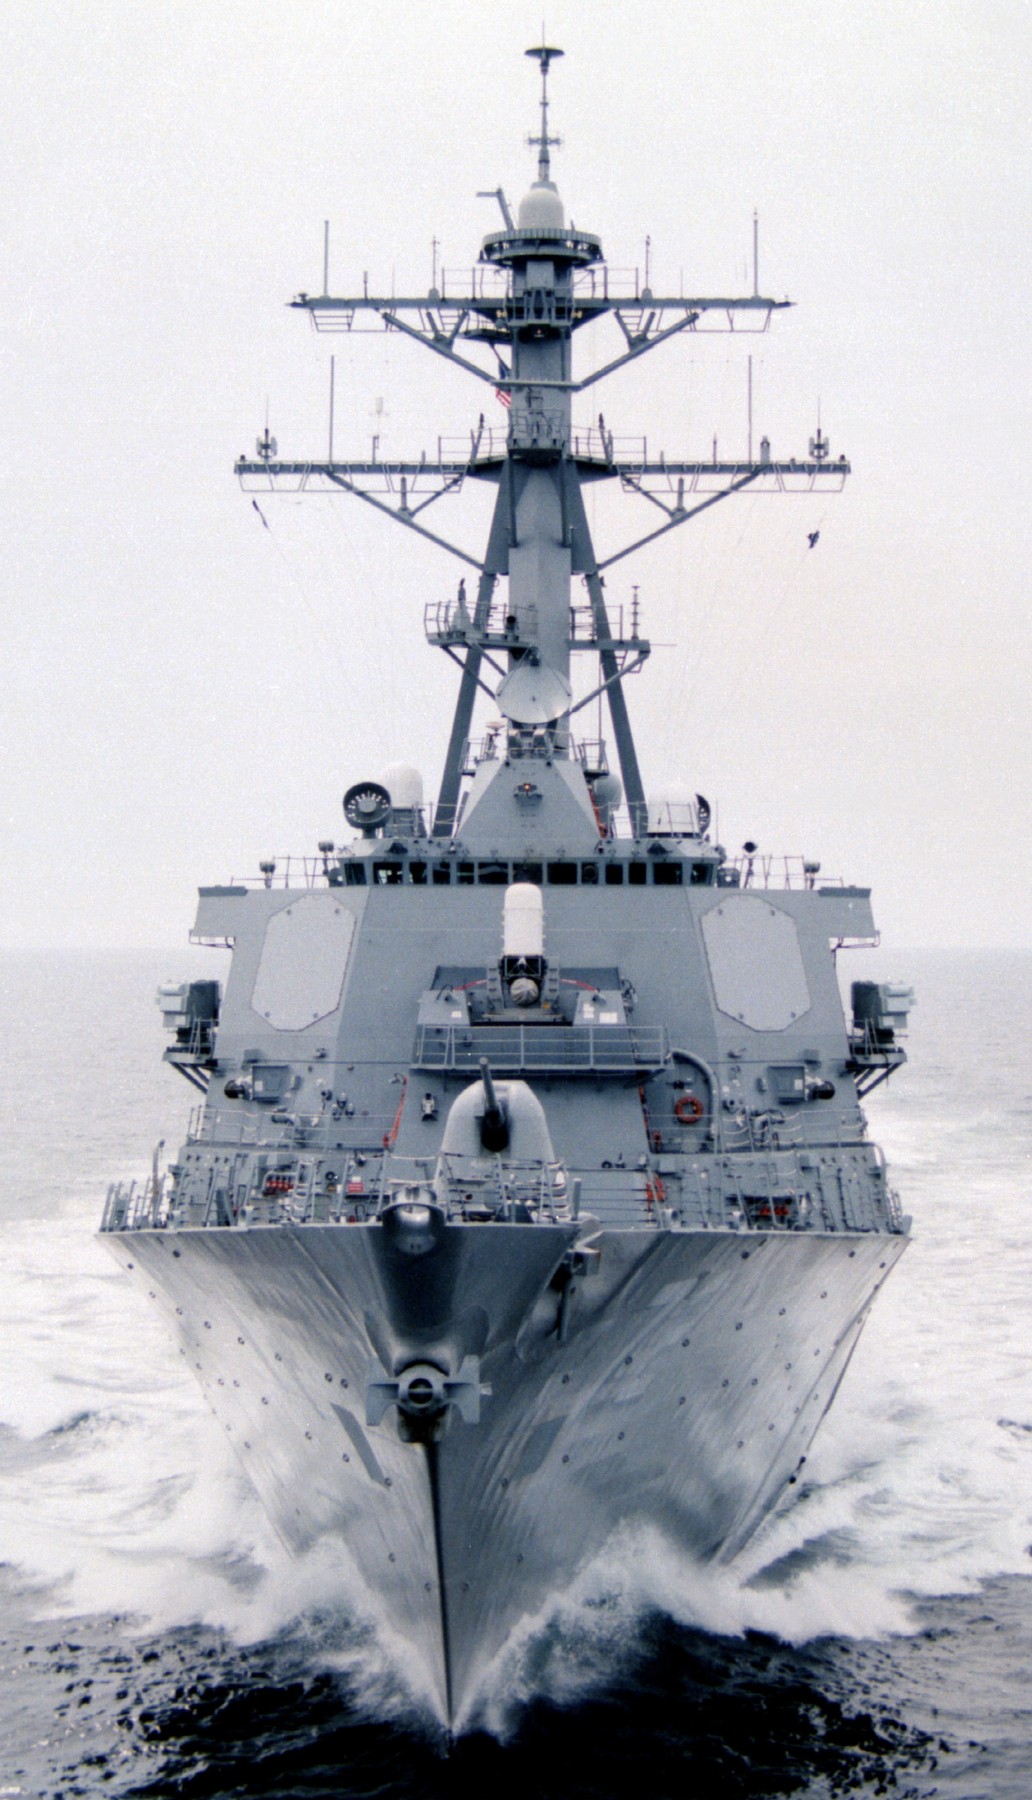 ddg-72 uss mahan guided missile destroyer arleigh burke class aegis bmd 43